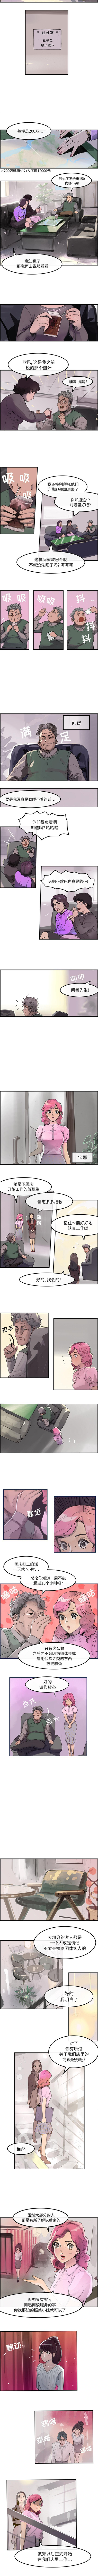 Cum Swallowing 任何小姐 1-31 Sloppy - Page 11